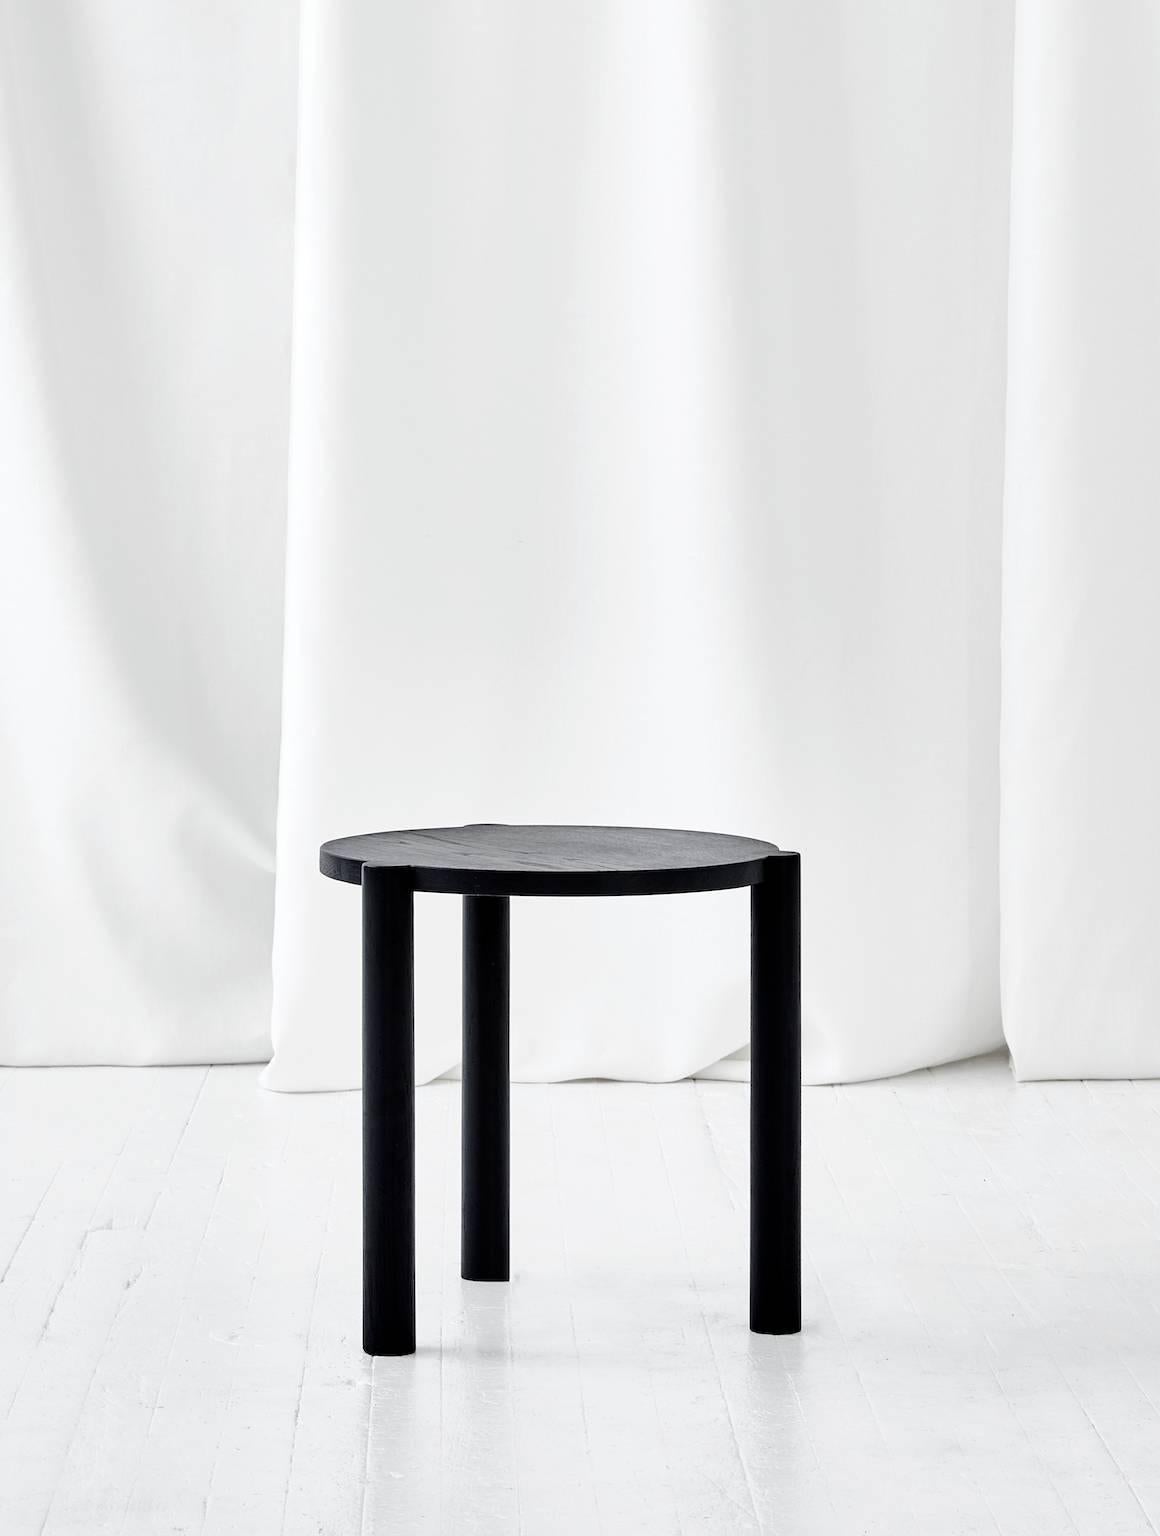 The WC4 by ASH NYC is a handsome side table with a low and sturdy stance. The hand-turned legs join seamlessly with the seat to create an elegant, handcrafted joint that defies gravity. 
 
An exercise in Minimalist design, the hidden joints allow